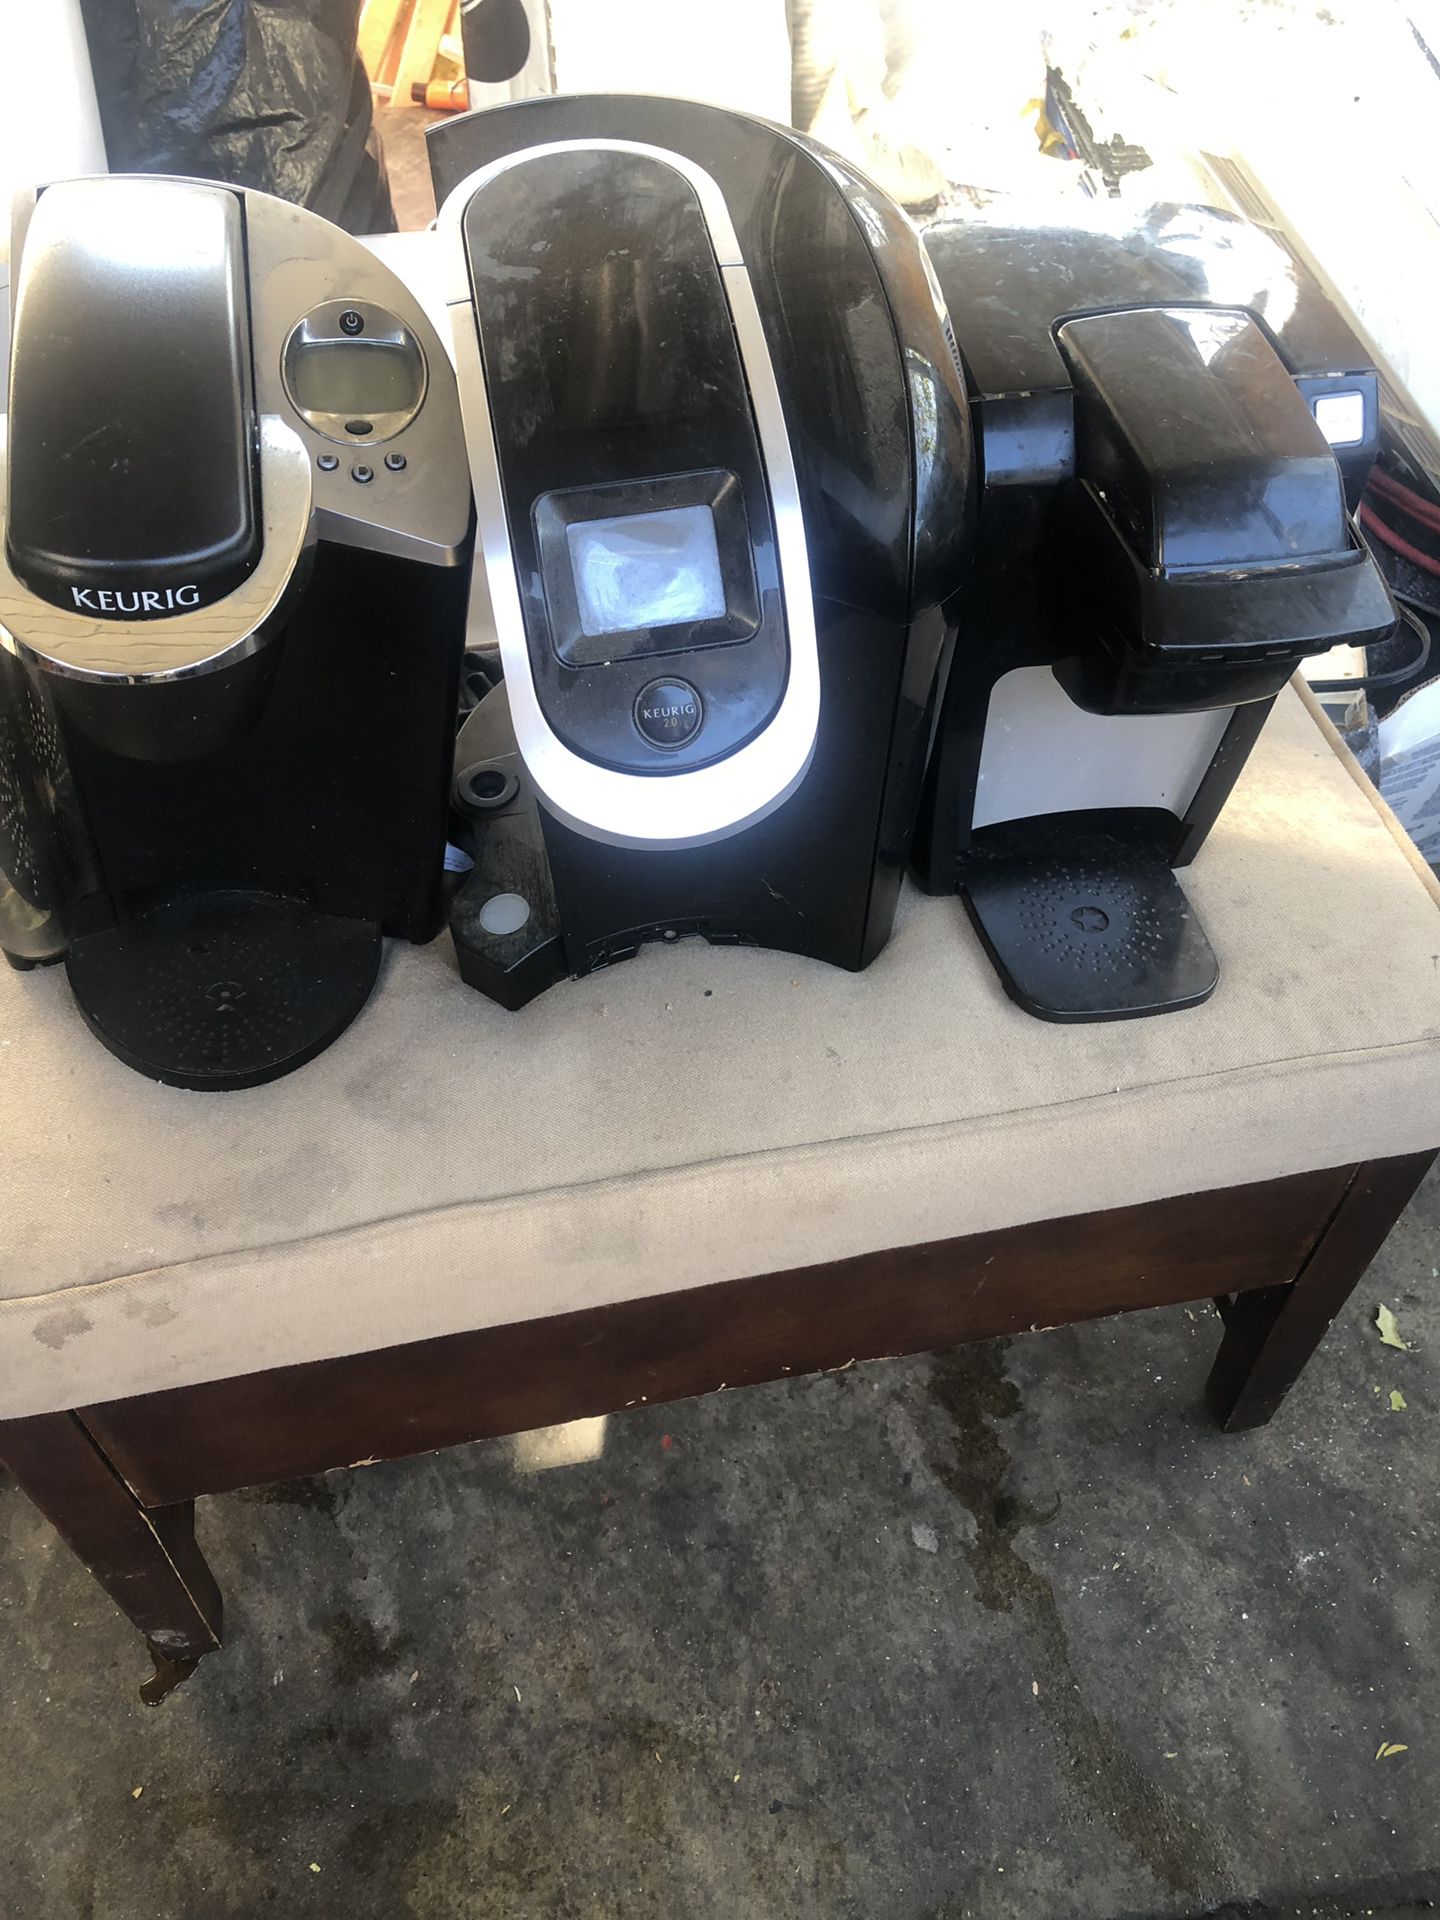 Coffee makers diffeent price works good all them